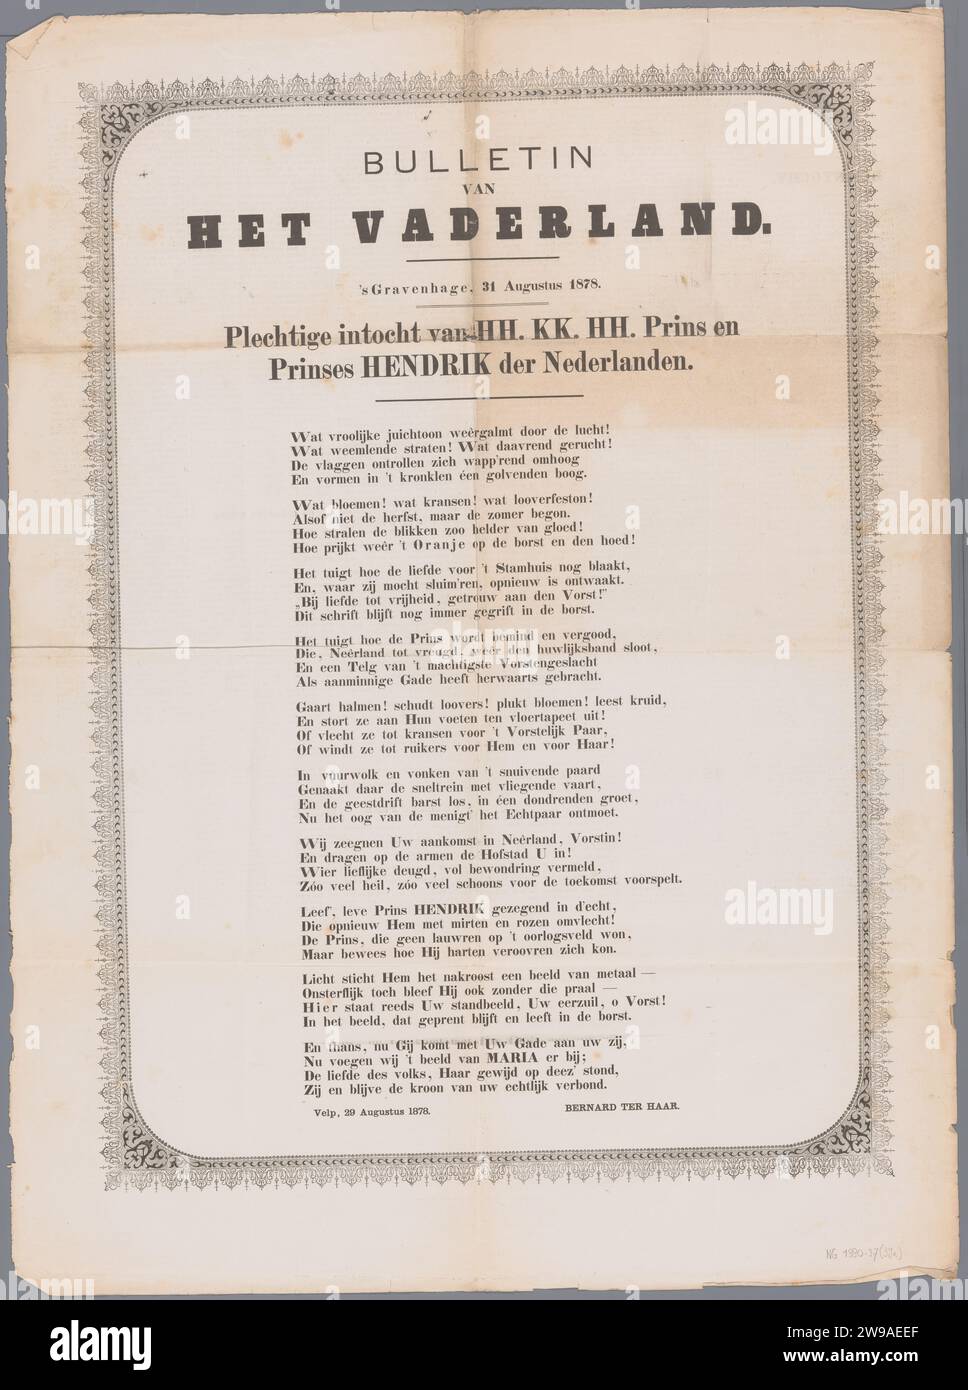 Bulletin van het Vaderland, Het Vaderland, 1878  Newspaper joint printed on both sides (1 leaf) front poem, 10 stanzas of 4 lines each in a decorated frame, back report of the entry of Prince Hendrik and his wife. The Hague paper printing  Netherlands Stock Photo